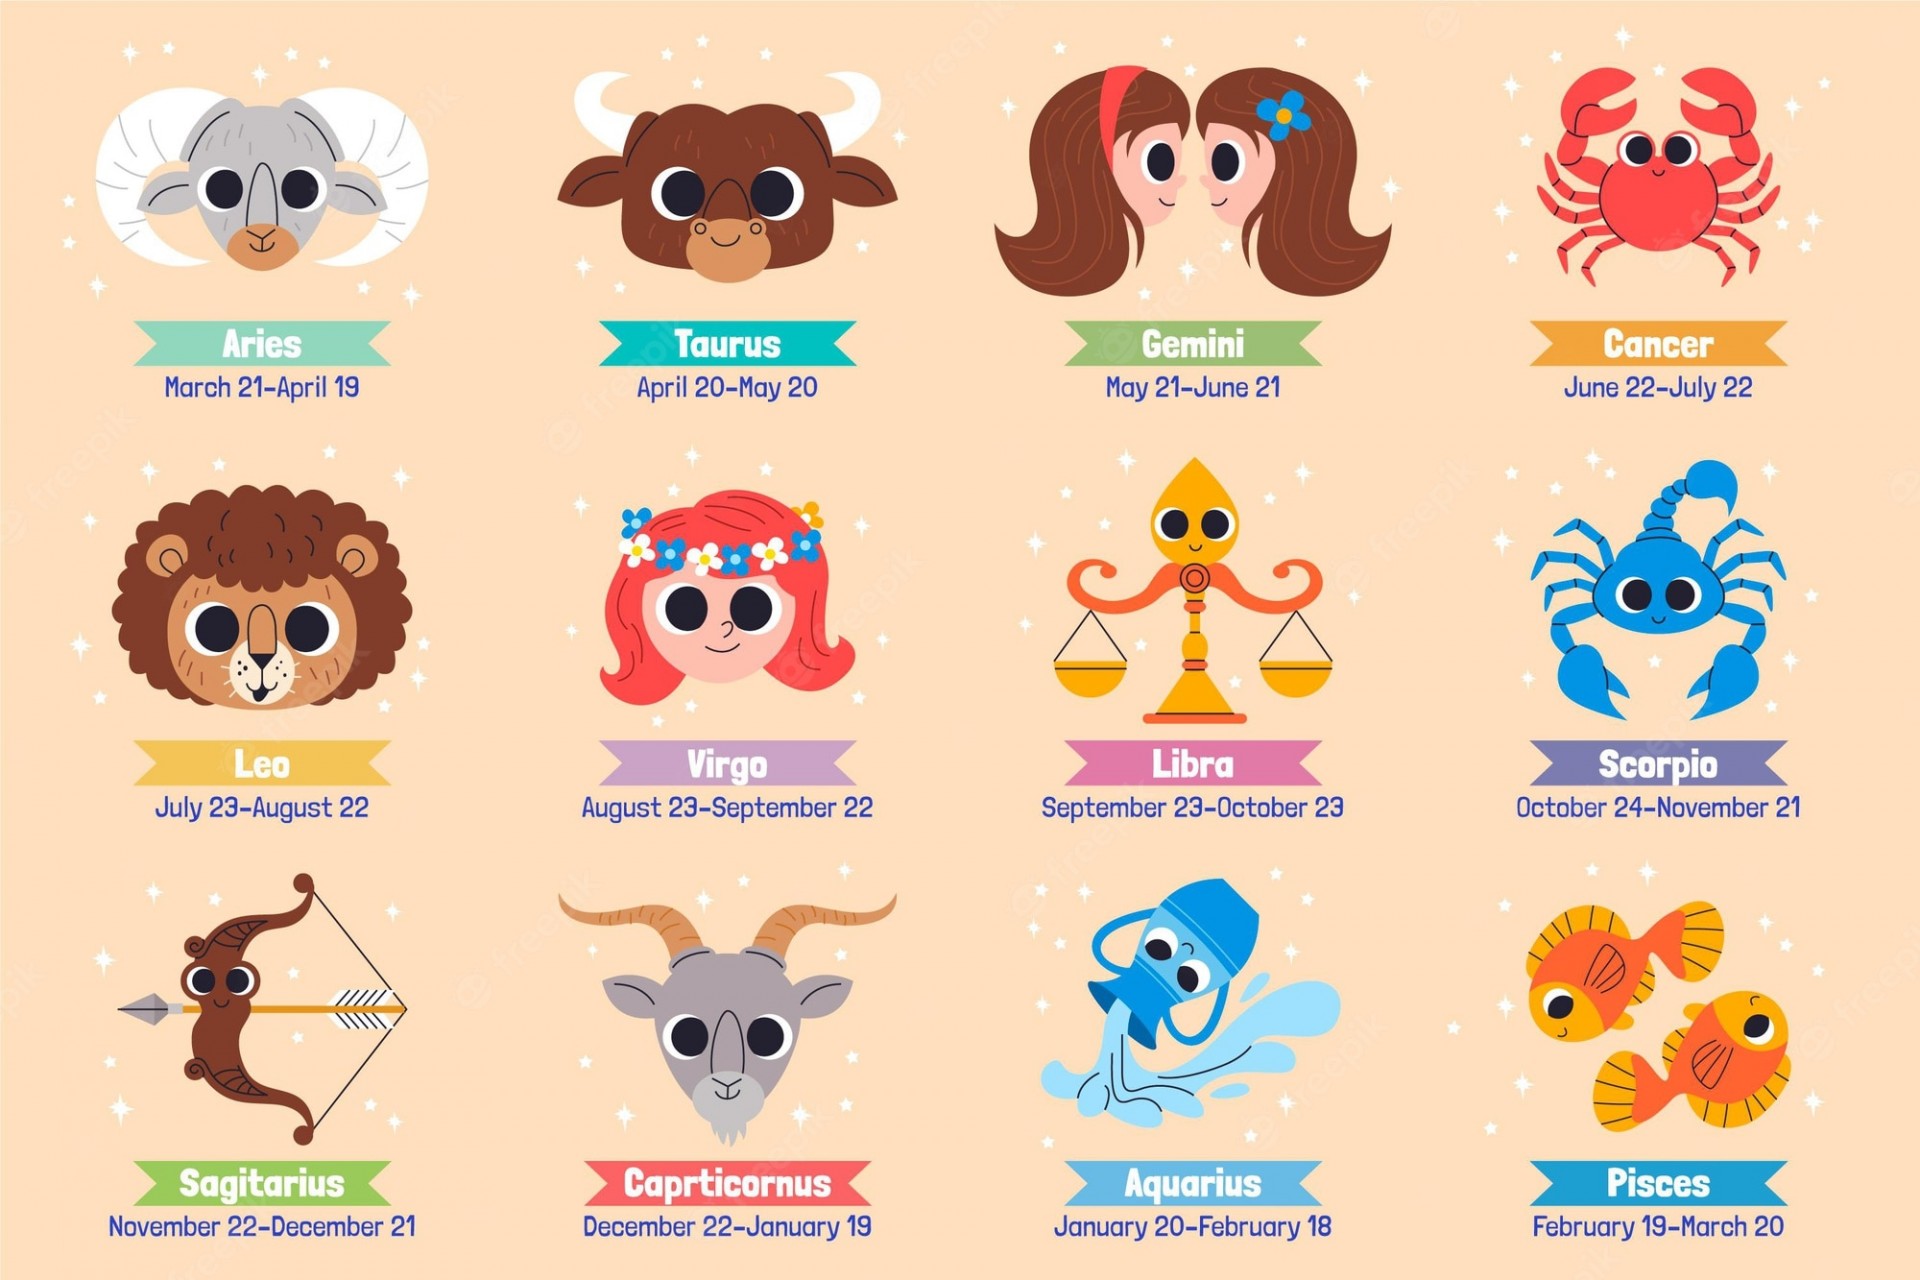 The Weaknesses of Each Zodiac Sign That You May Not Realize